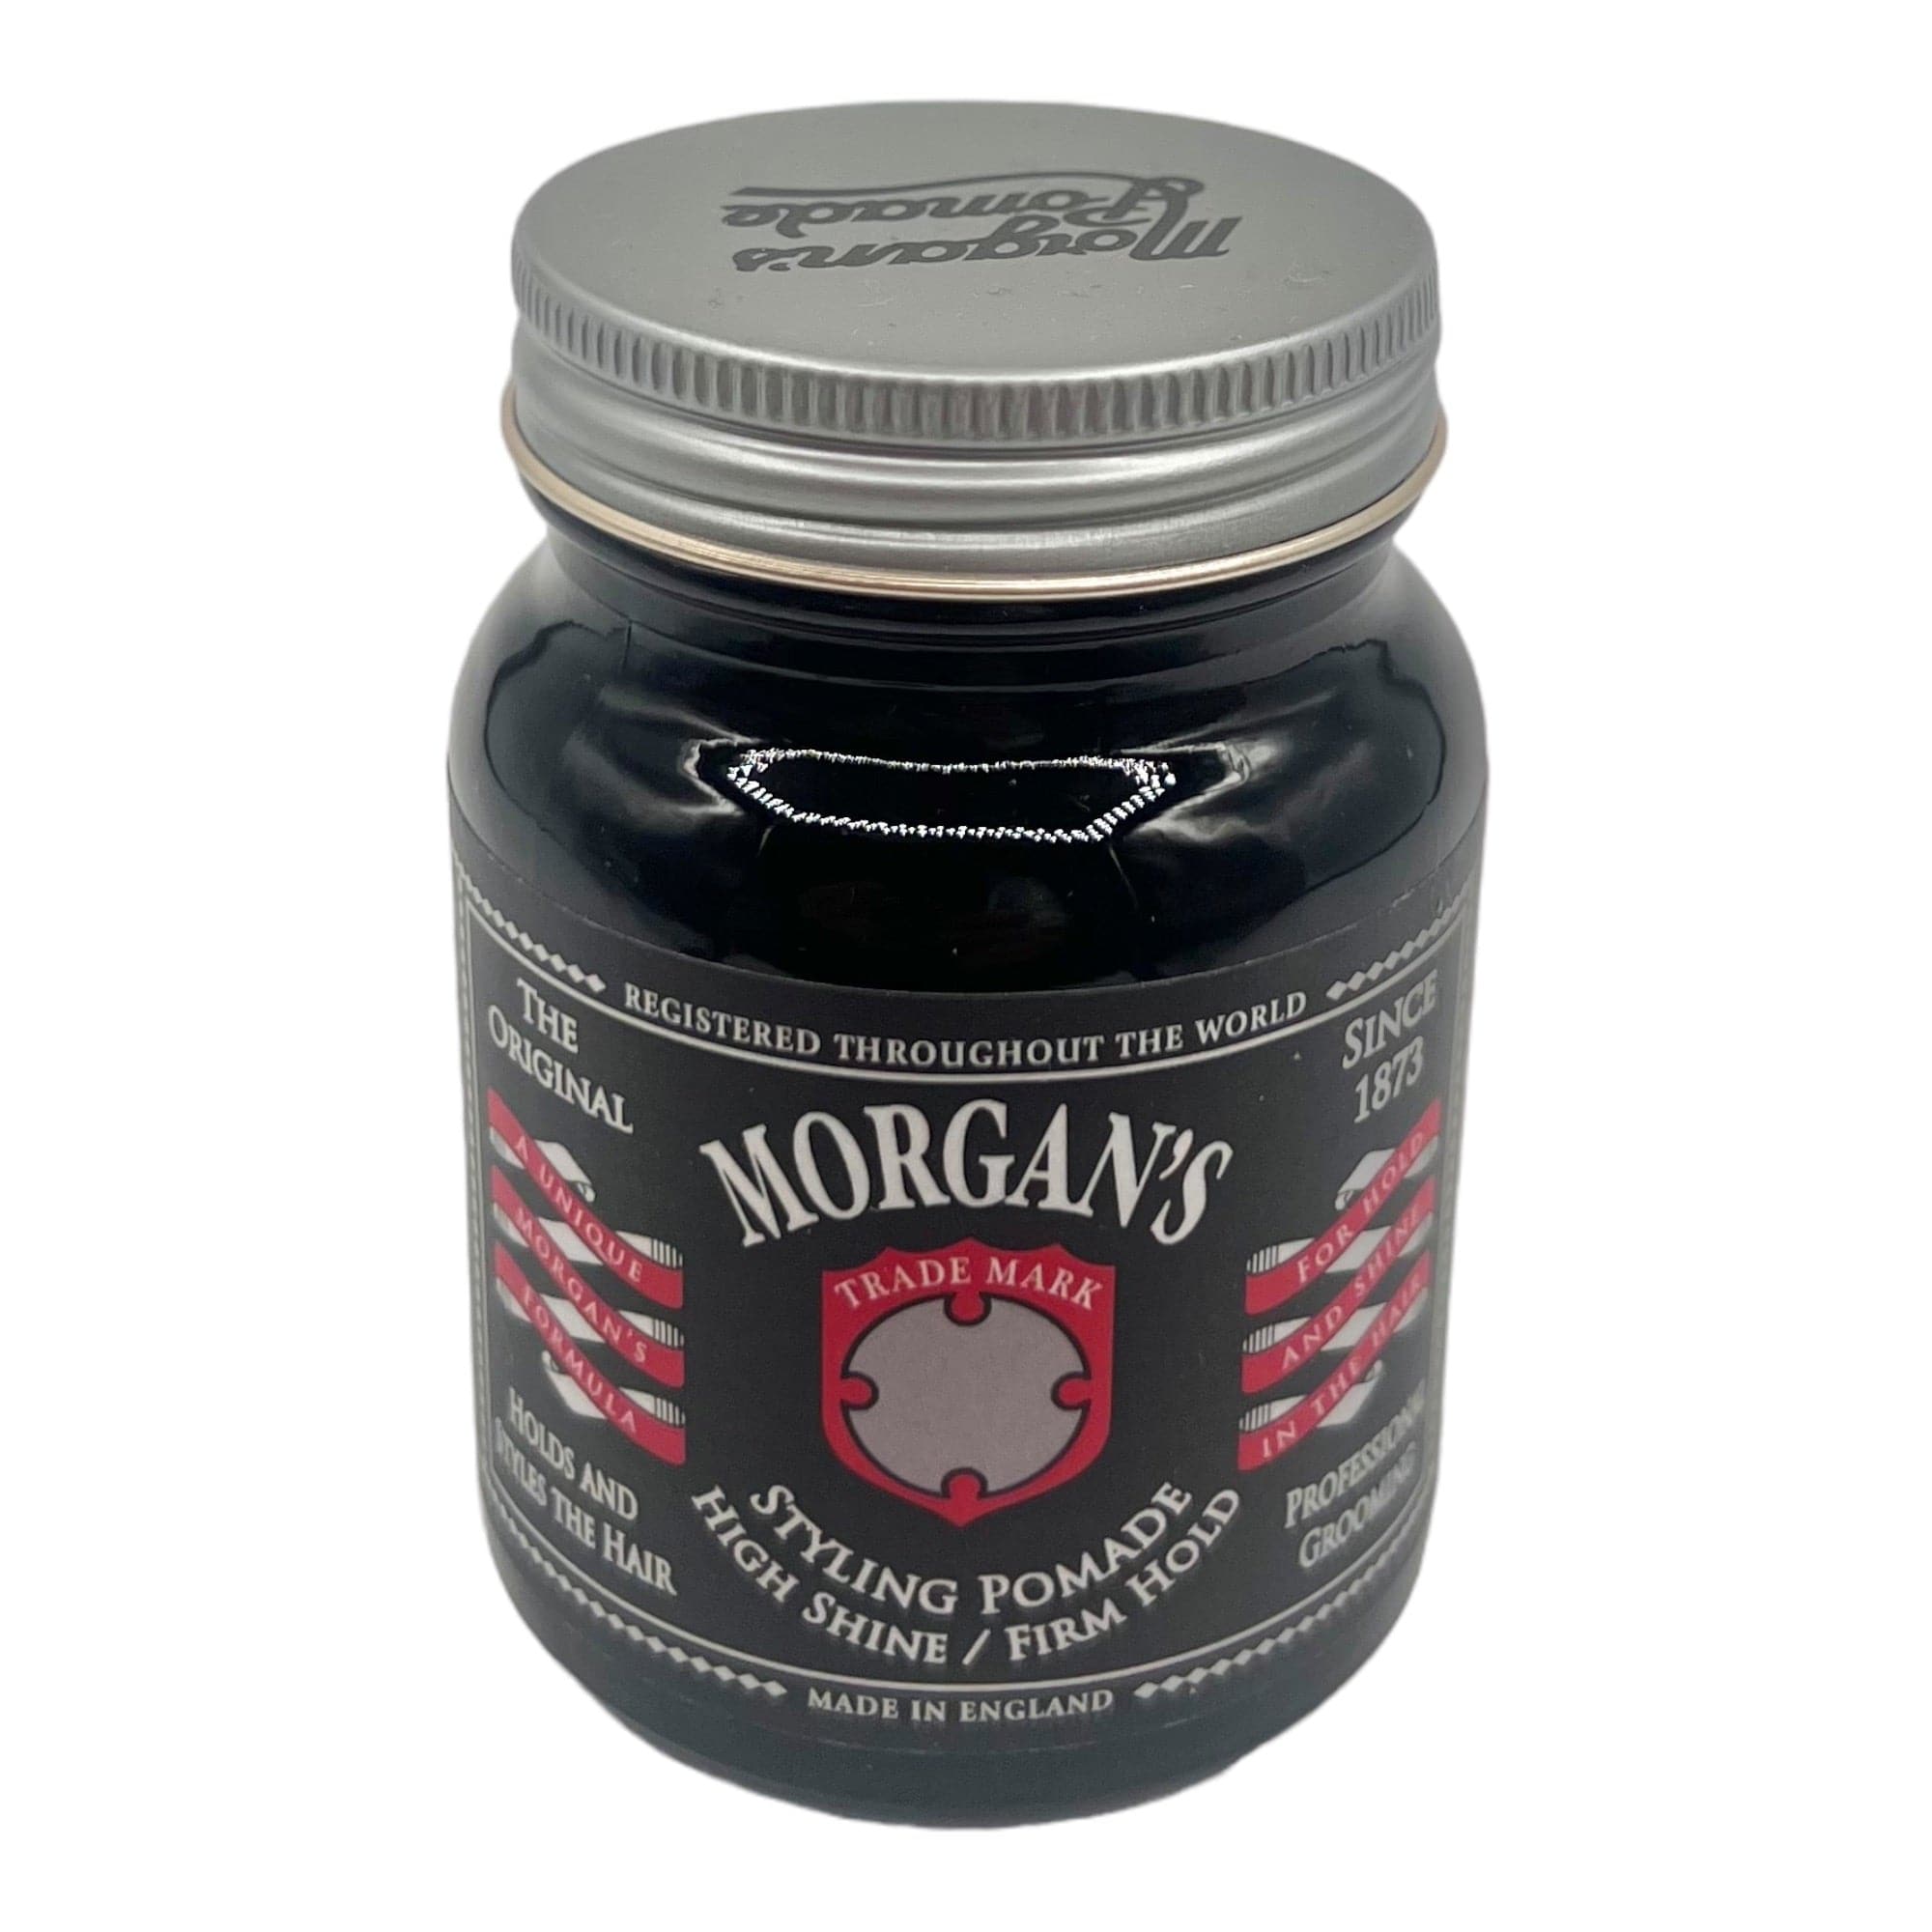 Morgan's - Styling Pomade High Shine Firm Hold 100g